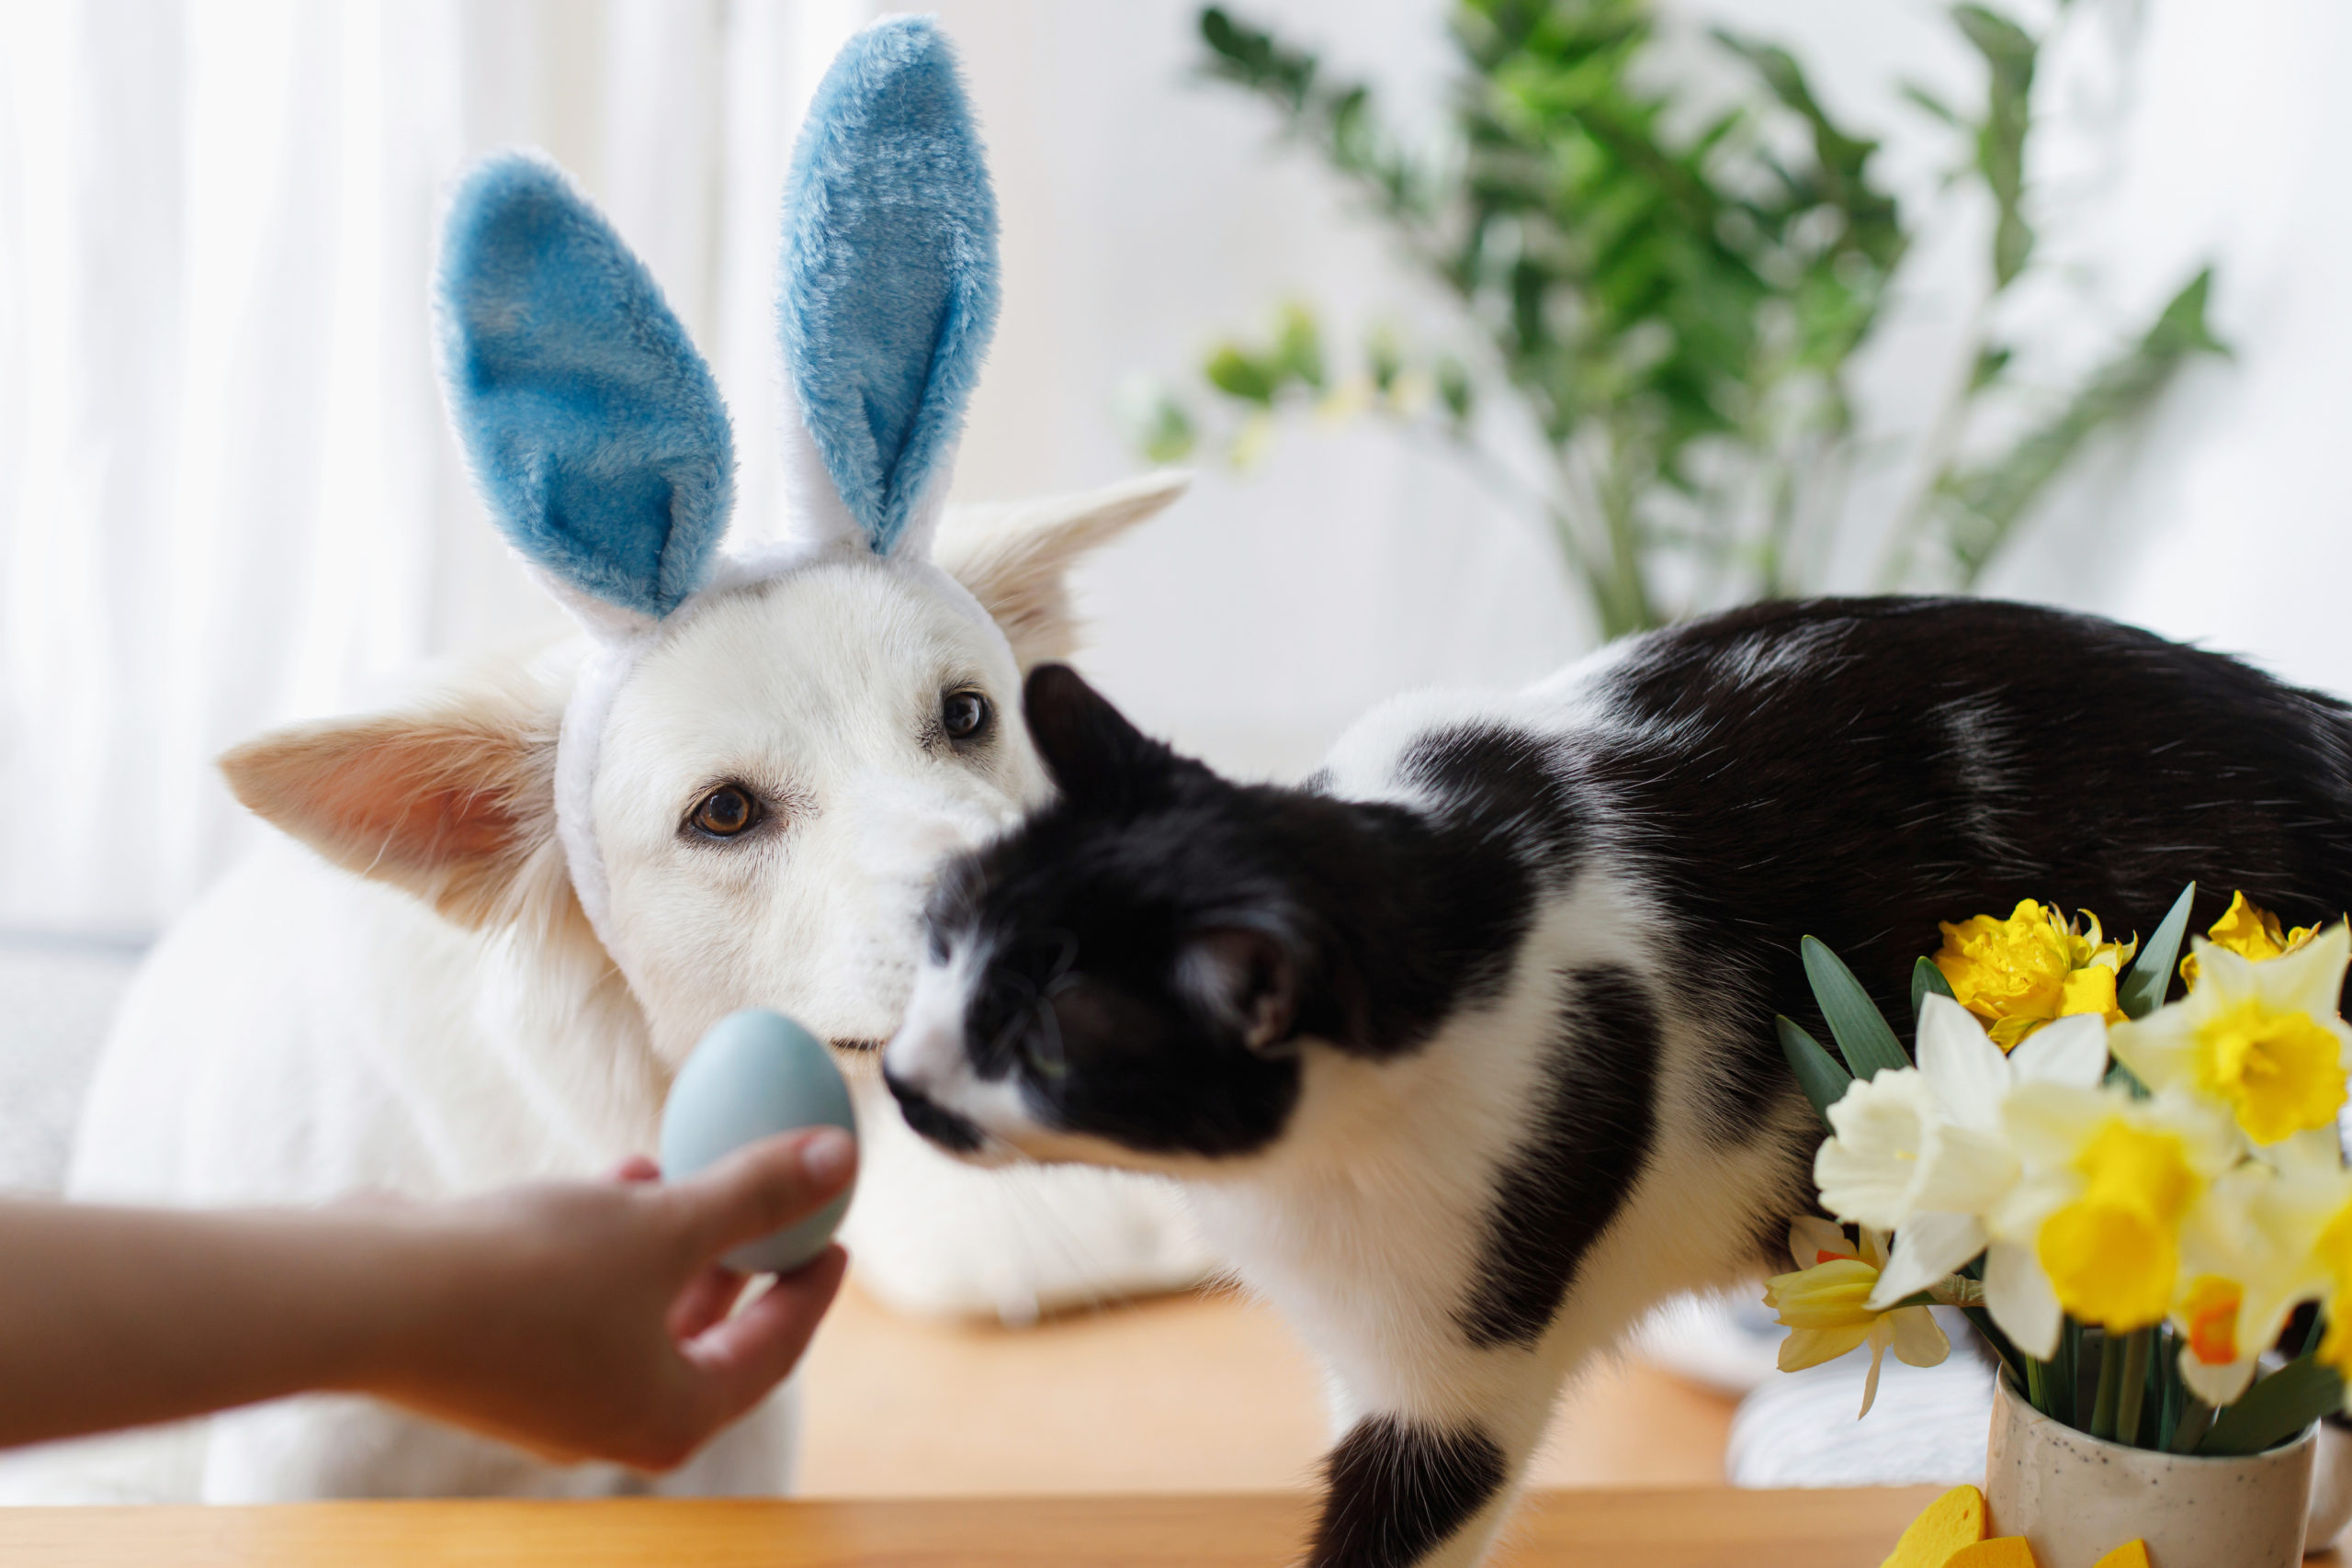 Have a pet friendly Easter in a Van